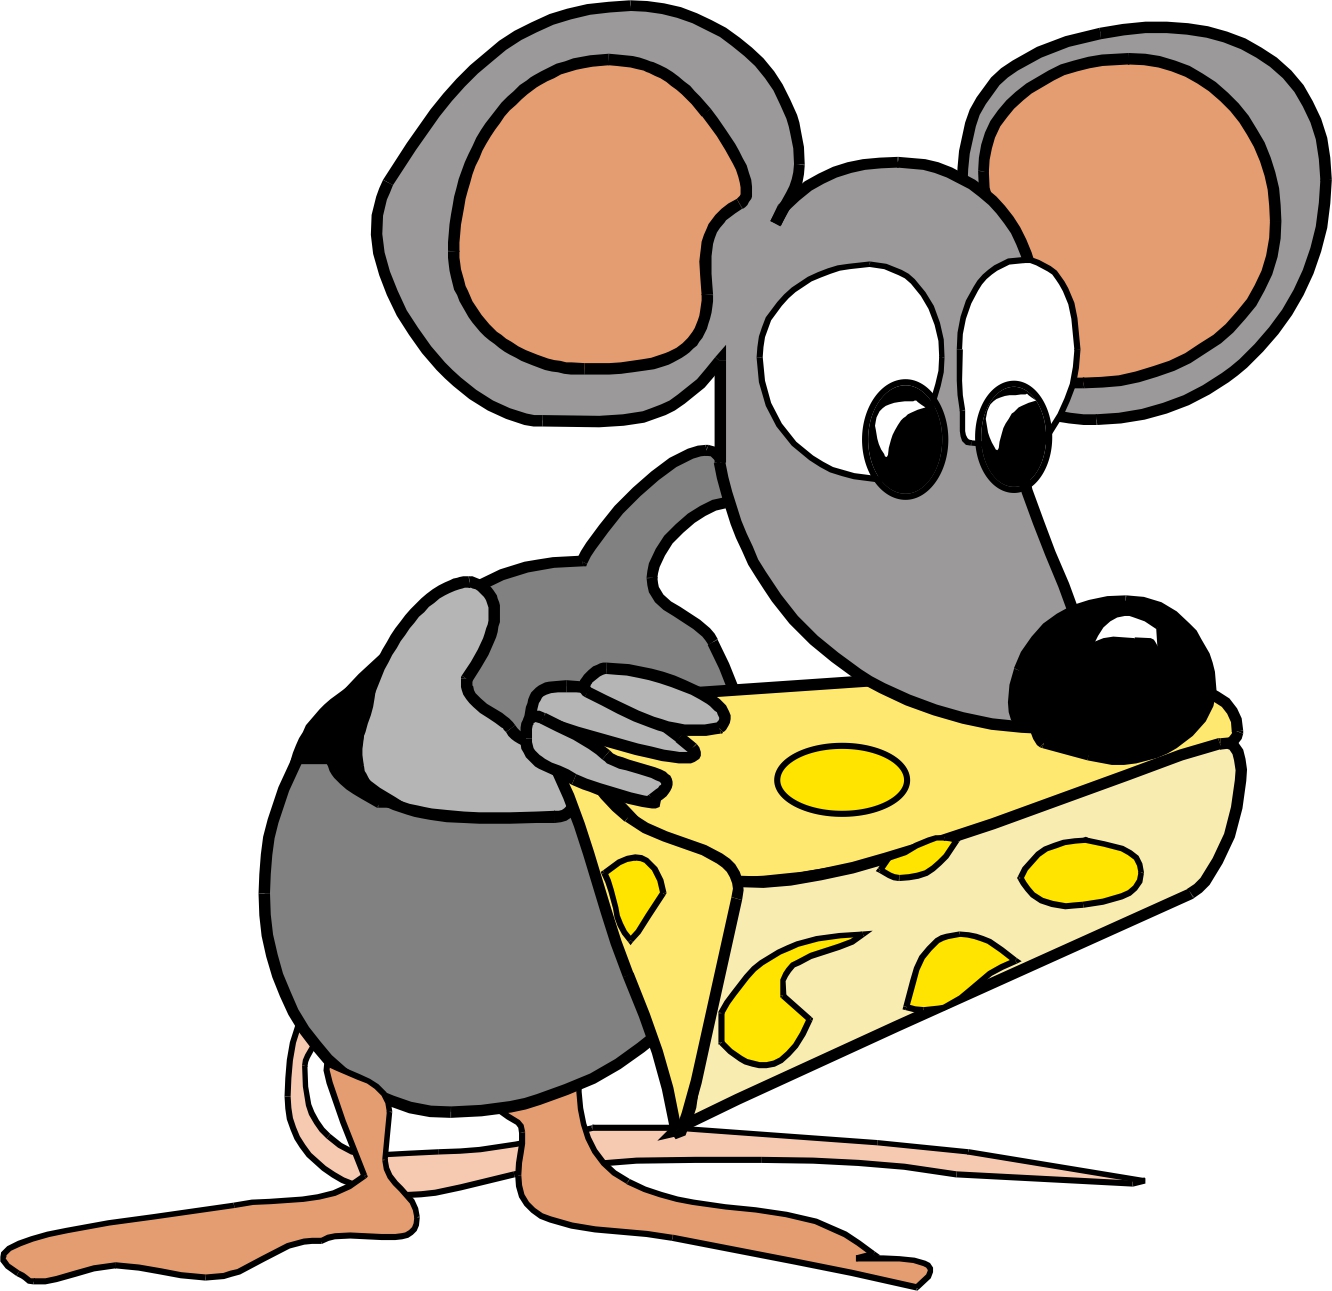 Mouse Cheese Clipart